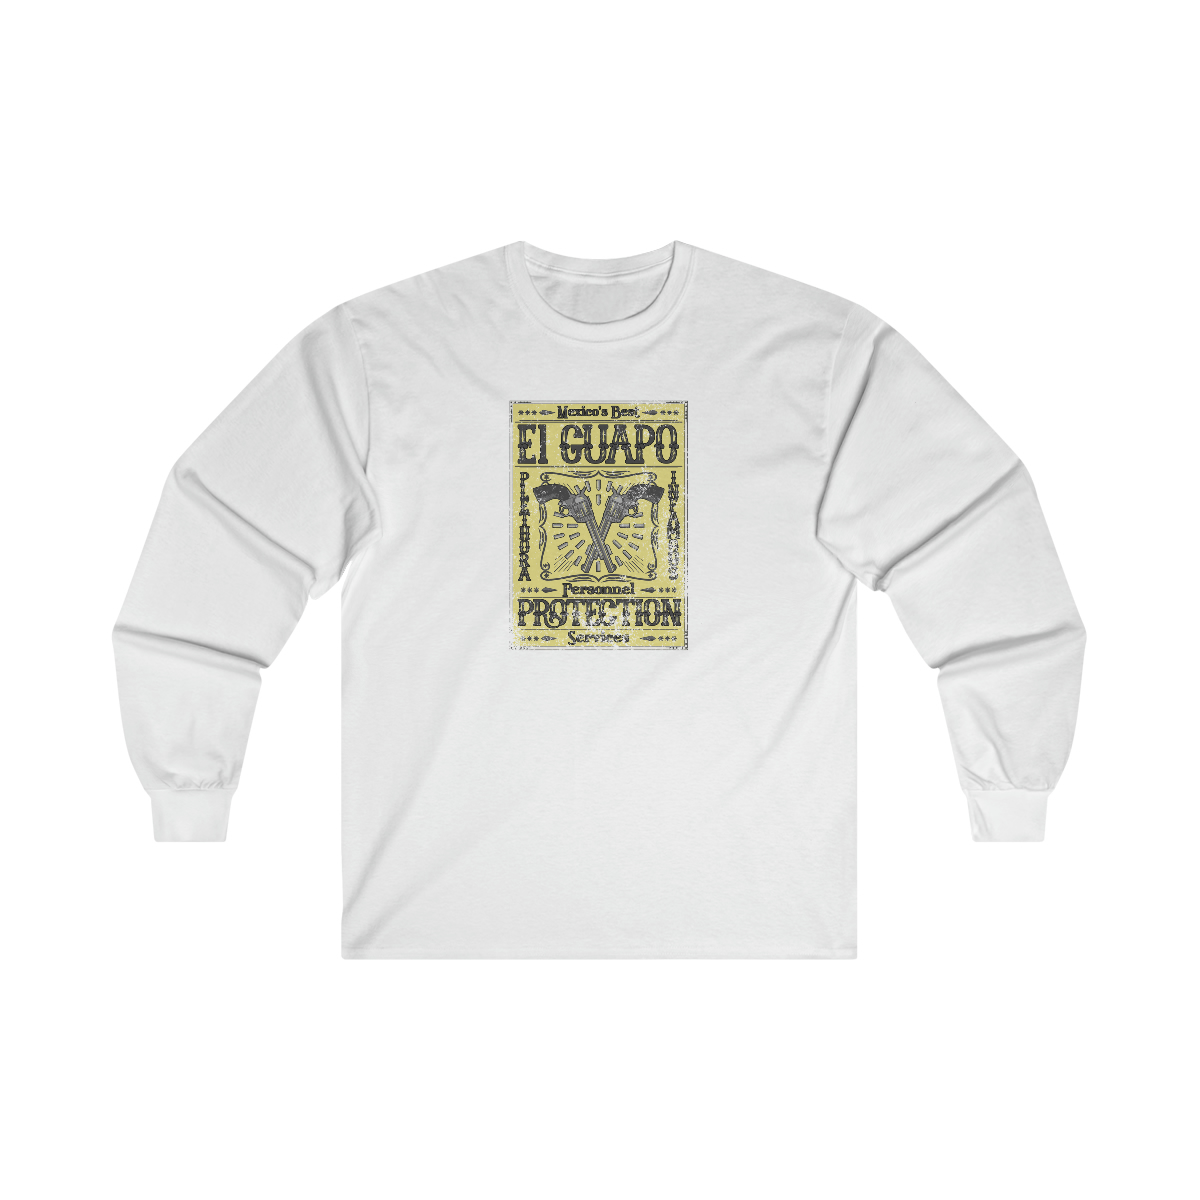 Personnel Protection (yellow) - Unisex Ultra Cotton Long Sleeve Tee